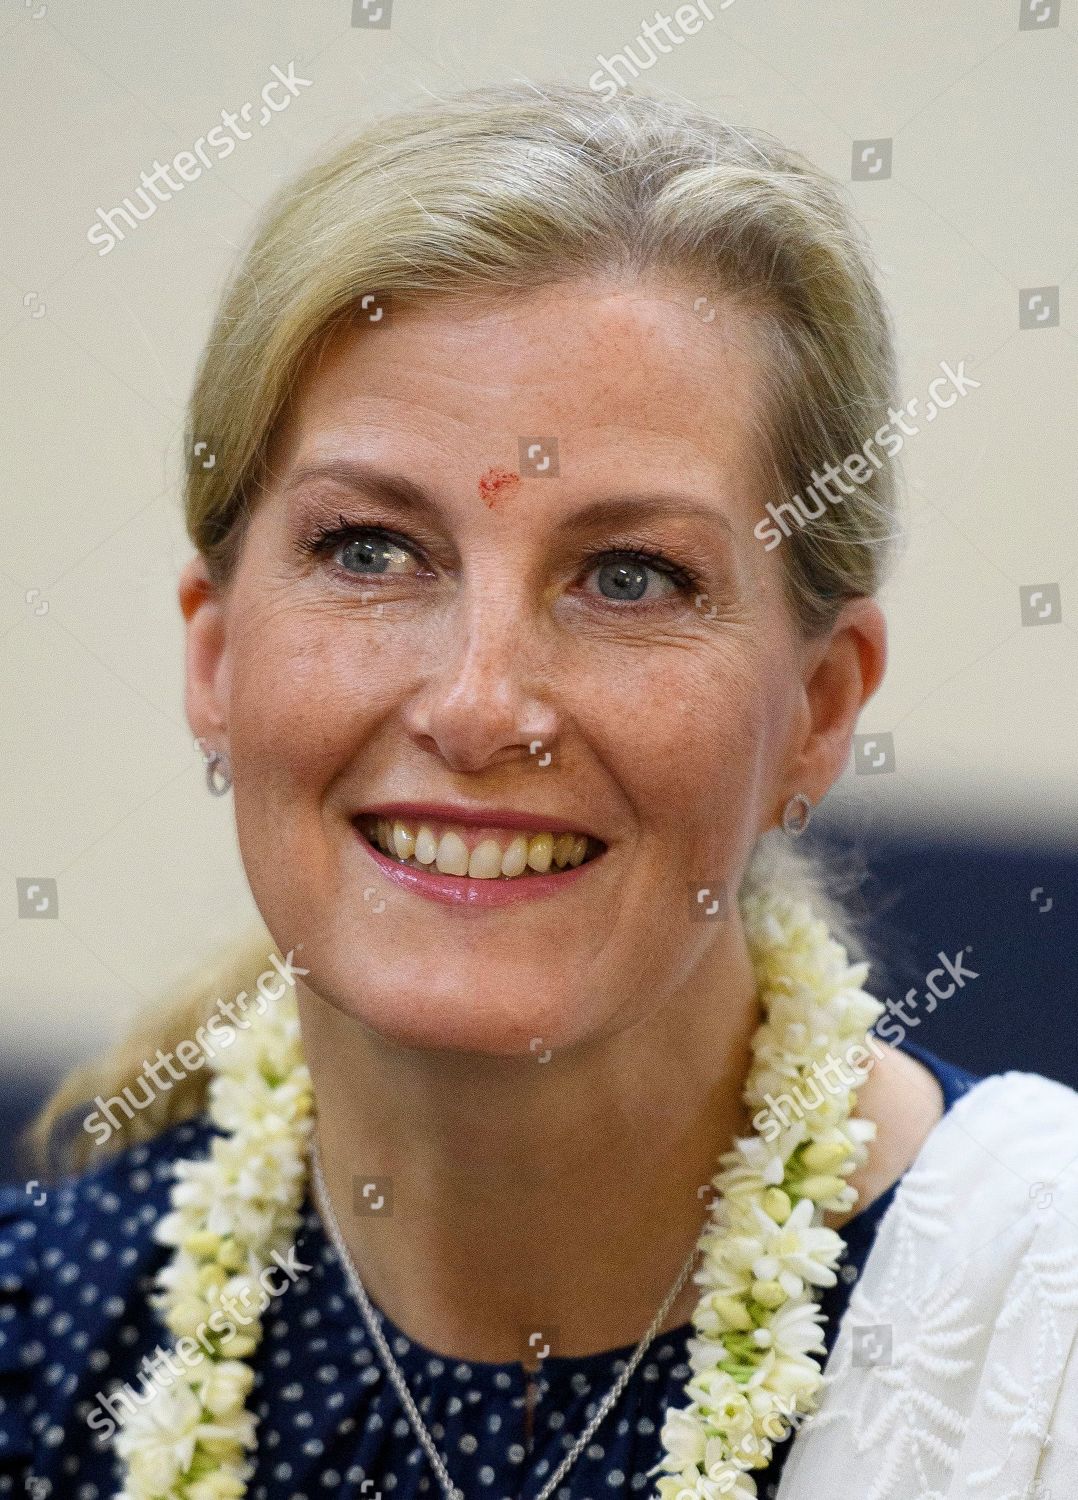 sophie-countess-of-wessex-visit-to-india-shutterstock-editorial-10227195r.jpg